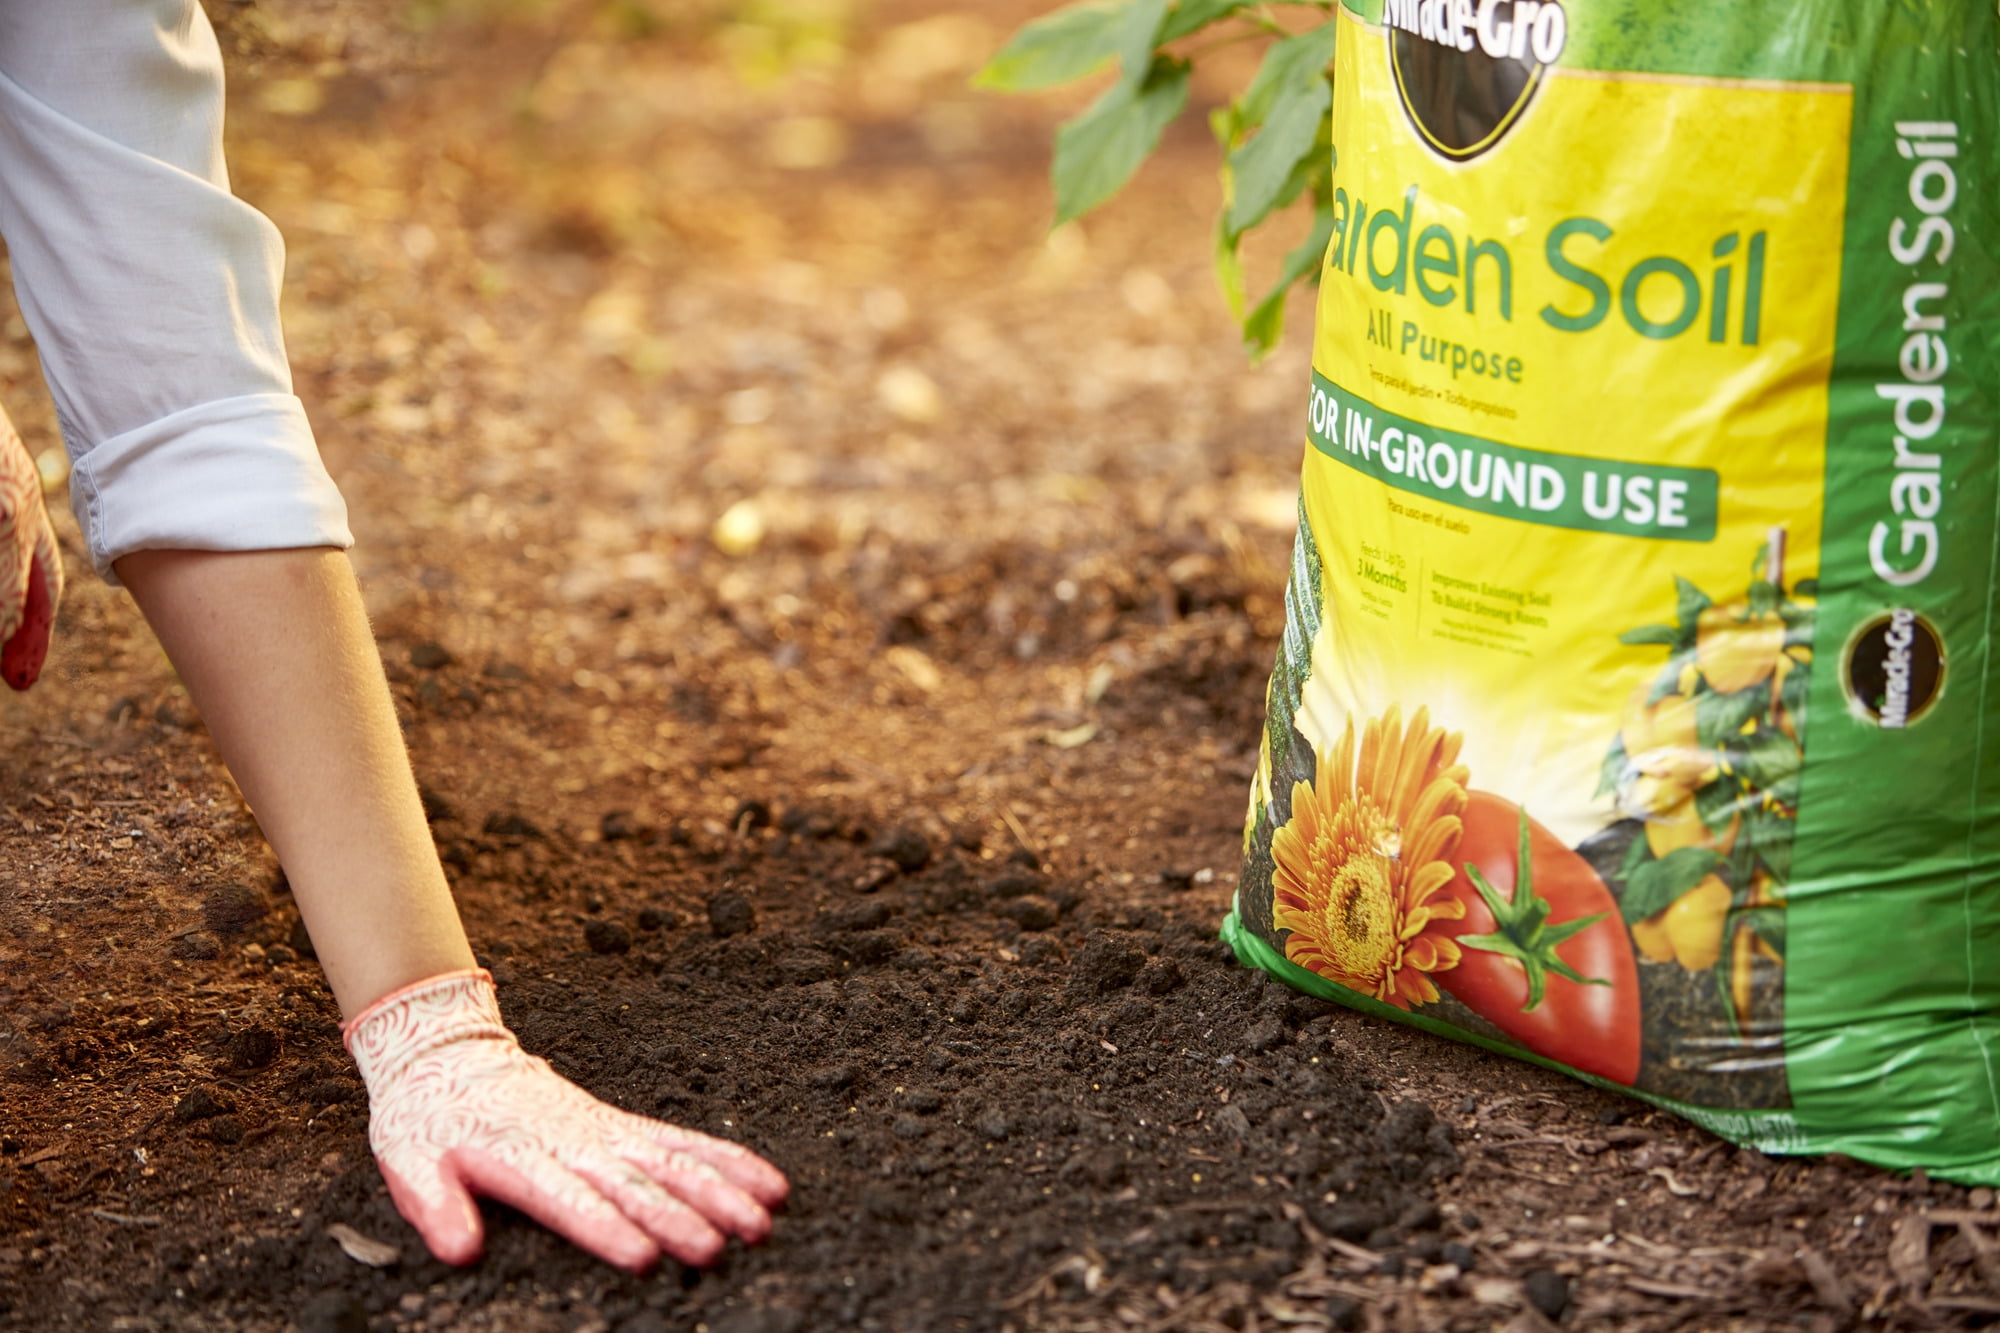 Miracle Gro Garden Soil All Purpose For In Ground Use 2 Cu Ft Feeds Up To 3 Months Walmart Com Walmart Com